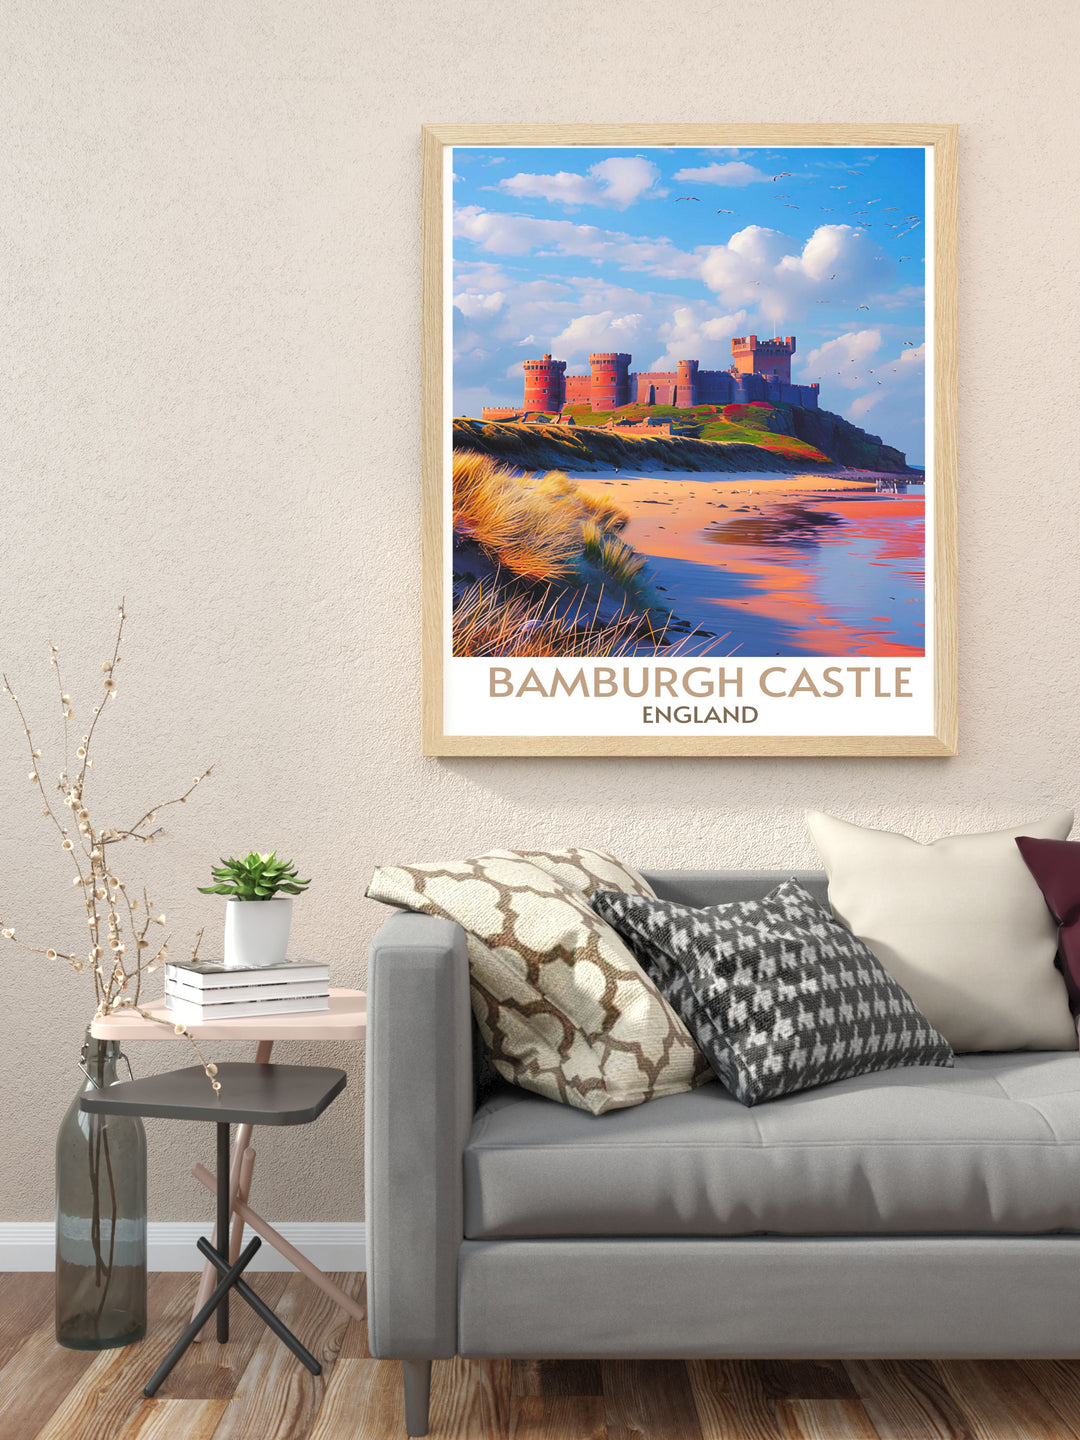 Bamburgh Castle vintage travel print that highlights the medieval architecture and scenic surroundings, a collectors delight.